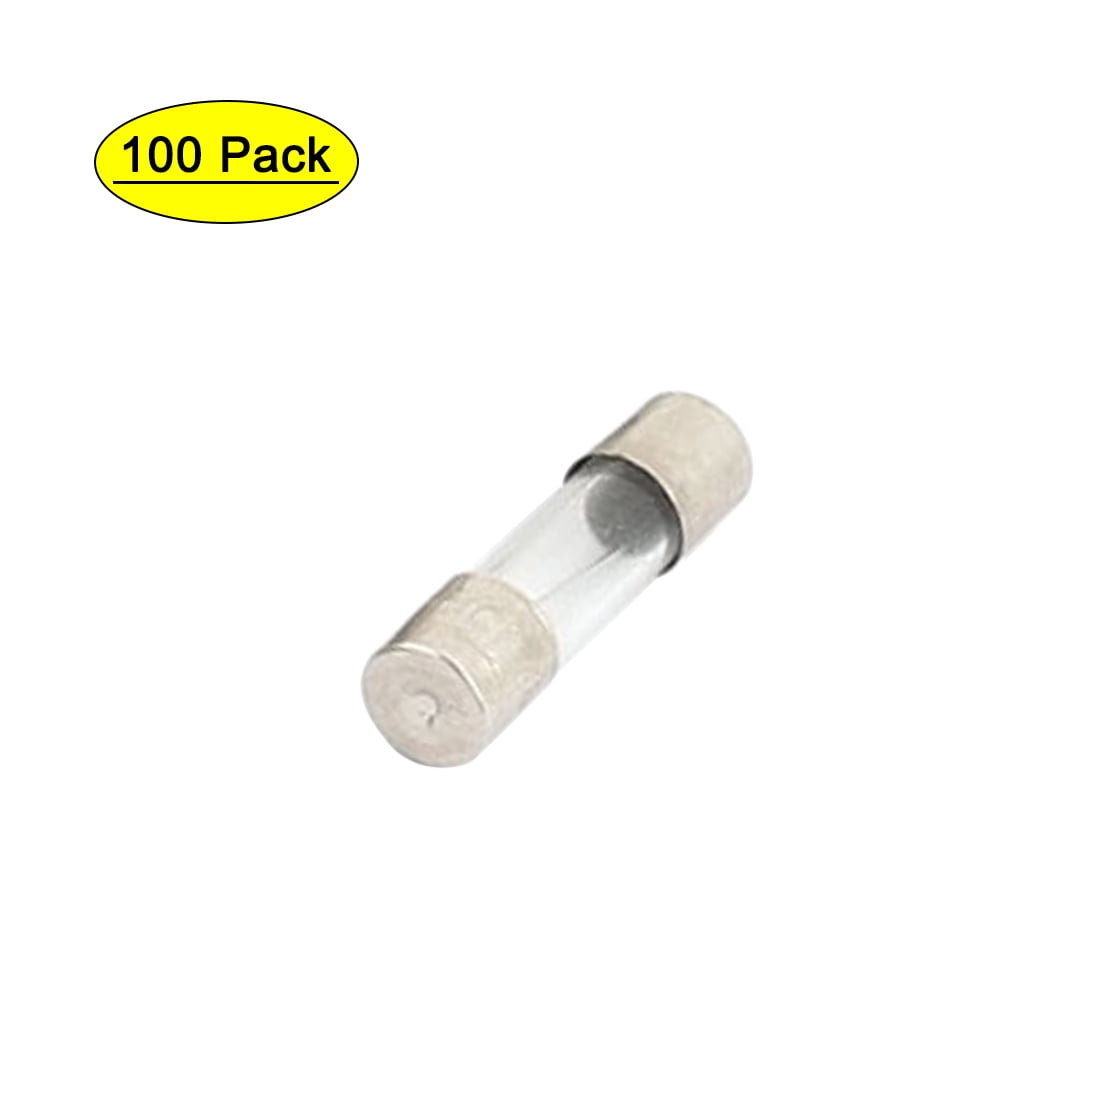 6mm x 30mm Low Breaking Fast Blow Fuses 250V 2A for CB Radio BUY 3 GET 1 FREE 